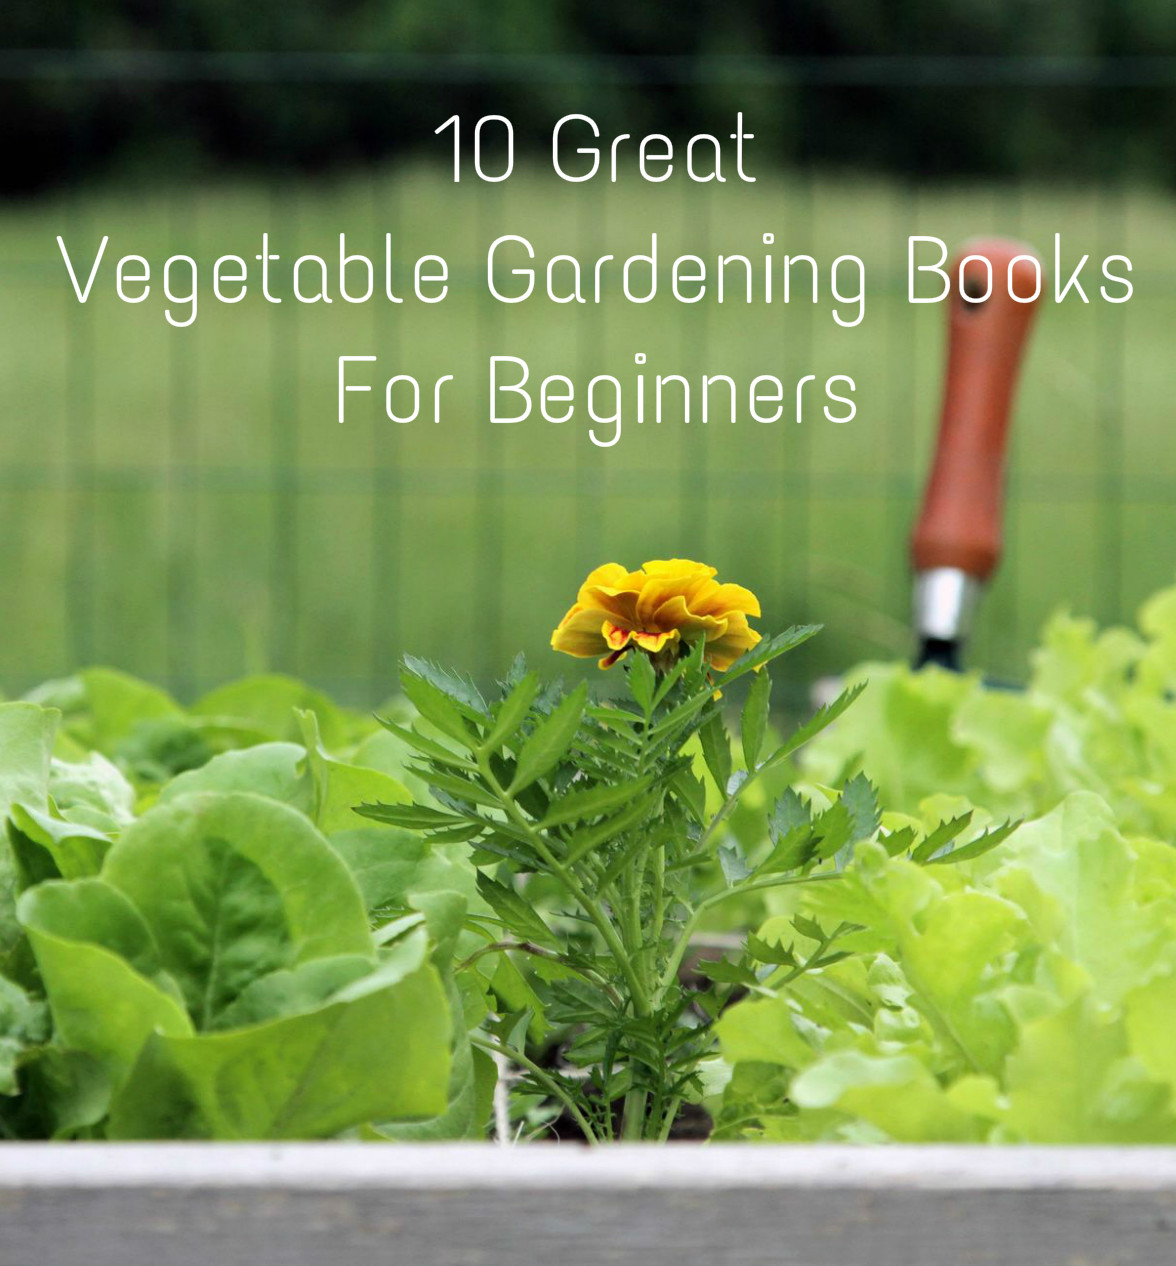 Small Gardening Ideas to Use in Small Spaces
